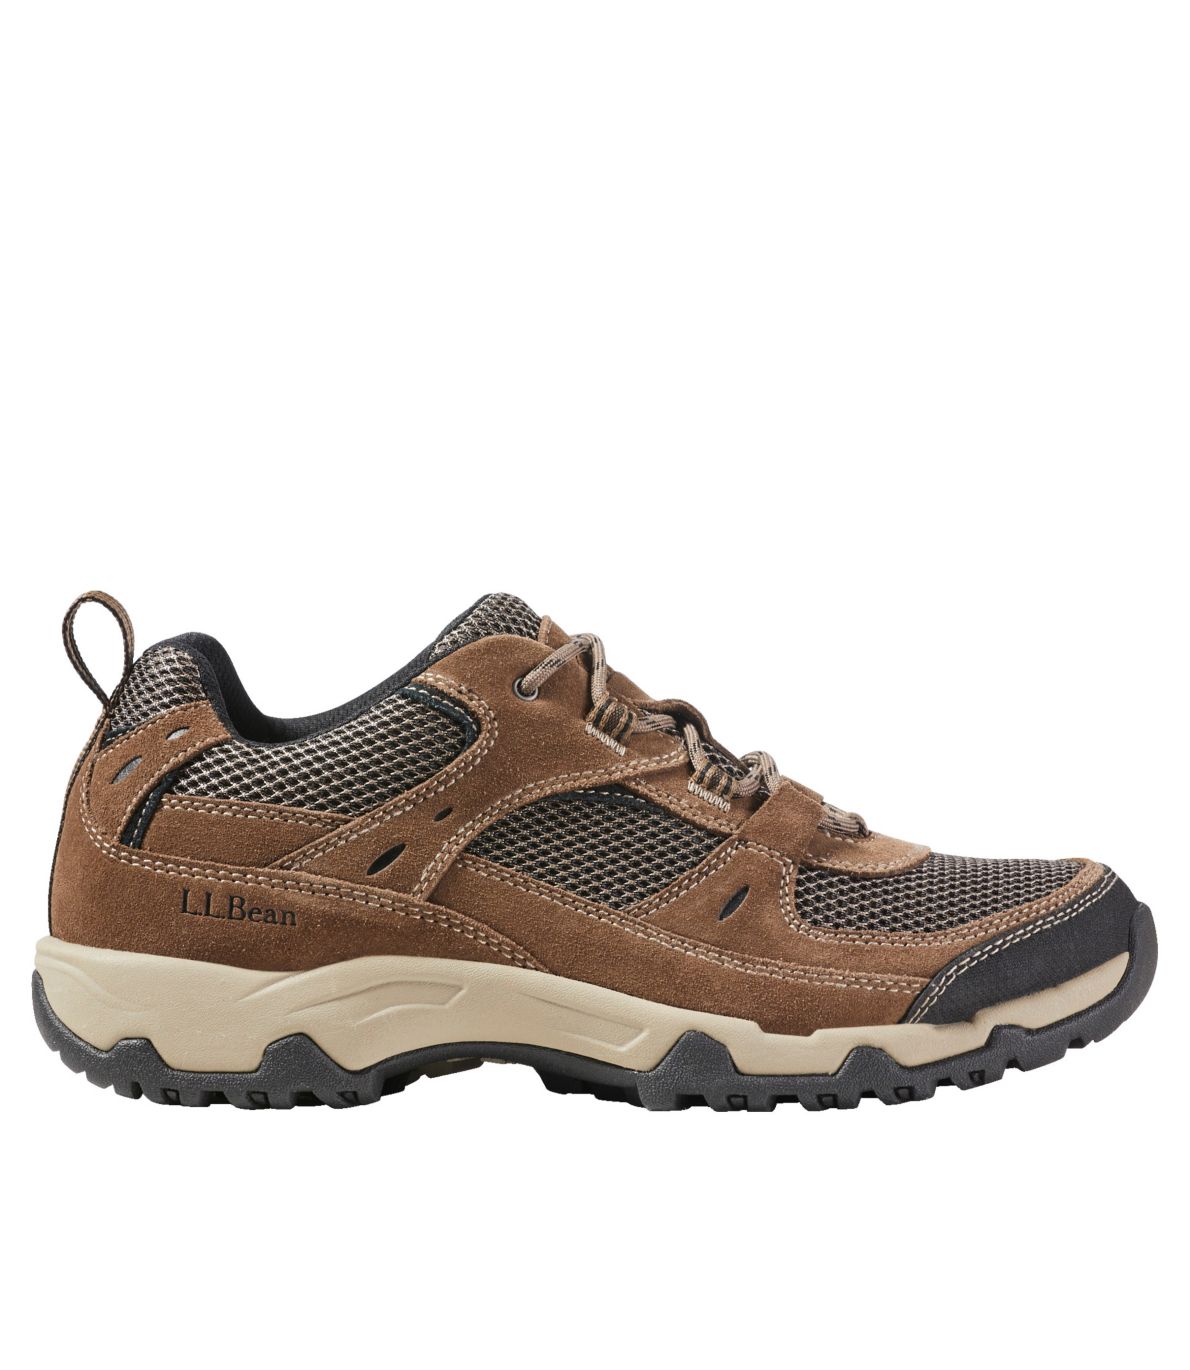 Men's Trail Model 4 Hiking Shoes, Ventilated